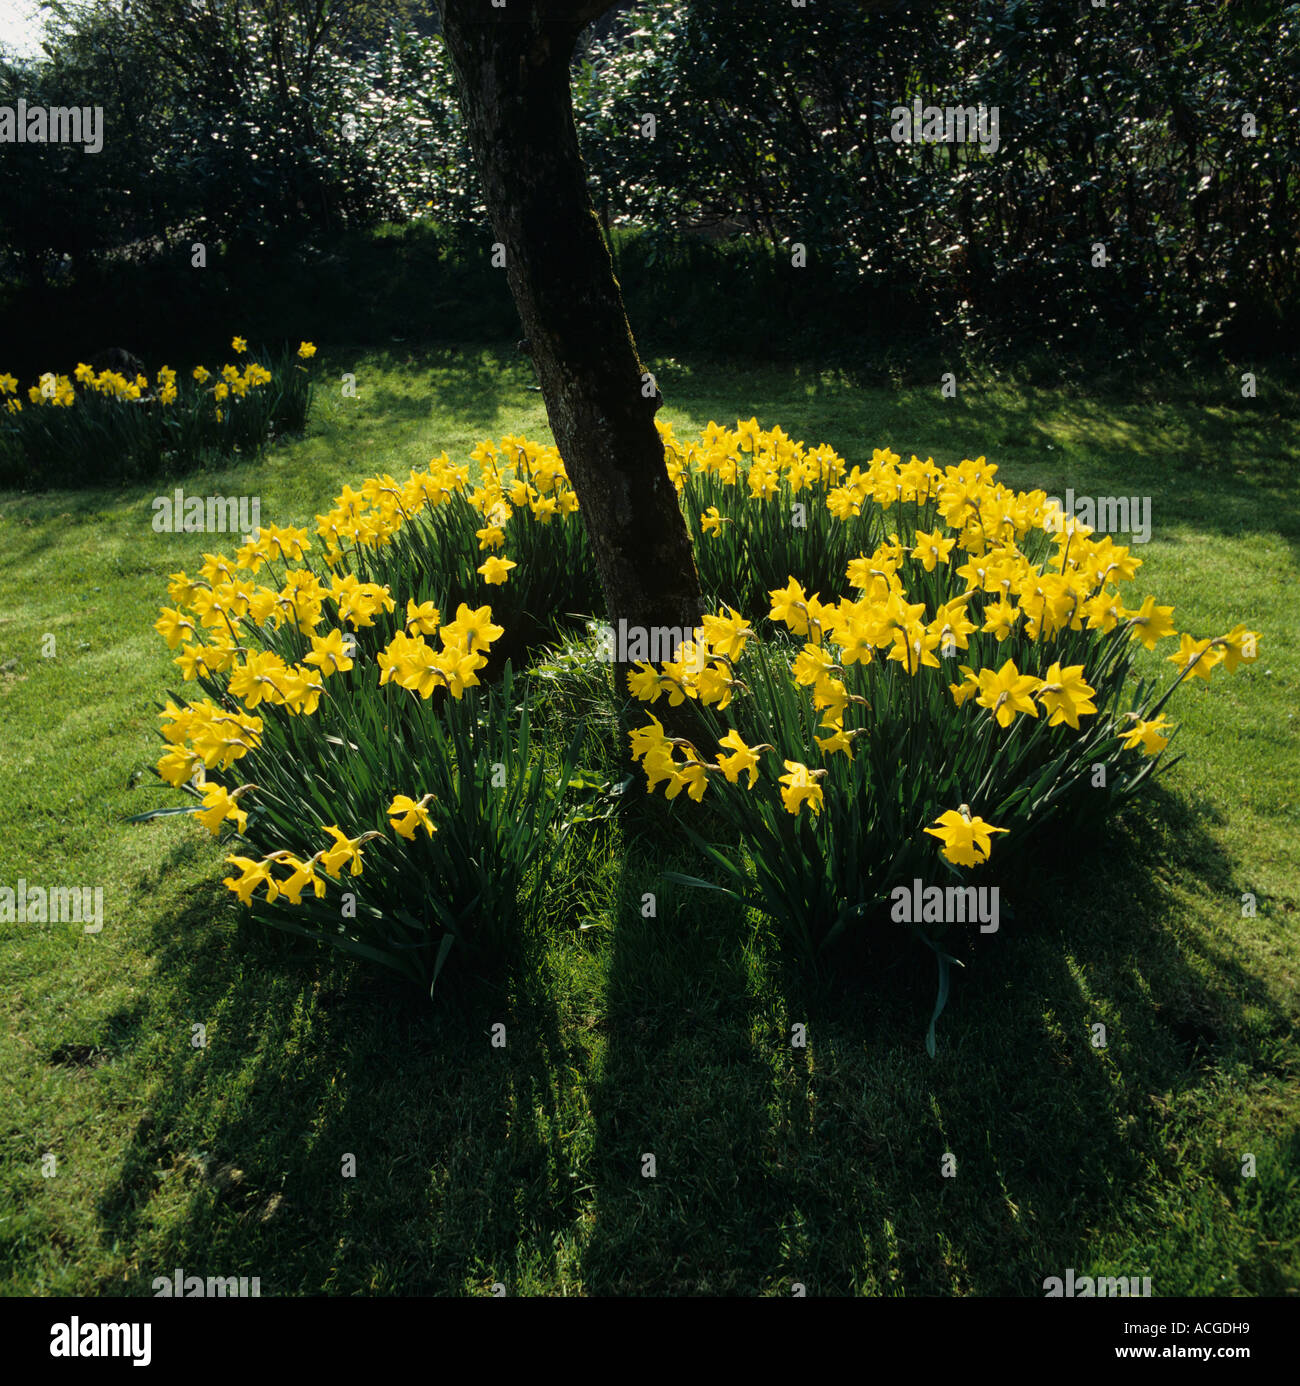 Ring of daffodils Narcissus sp under a leafless old apple tree in spring Stock Photo